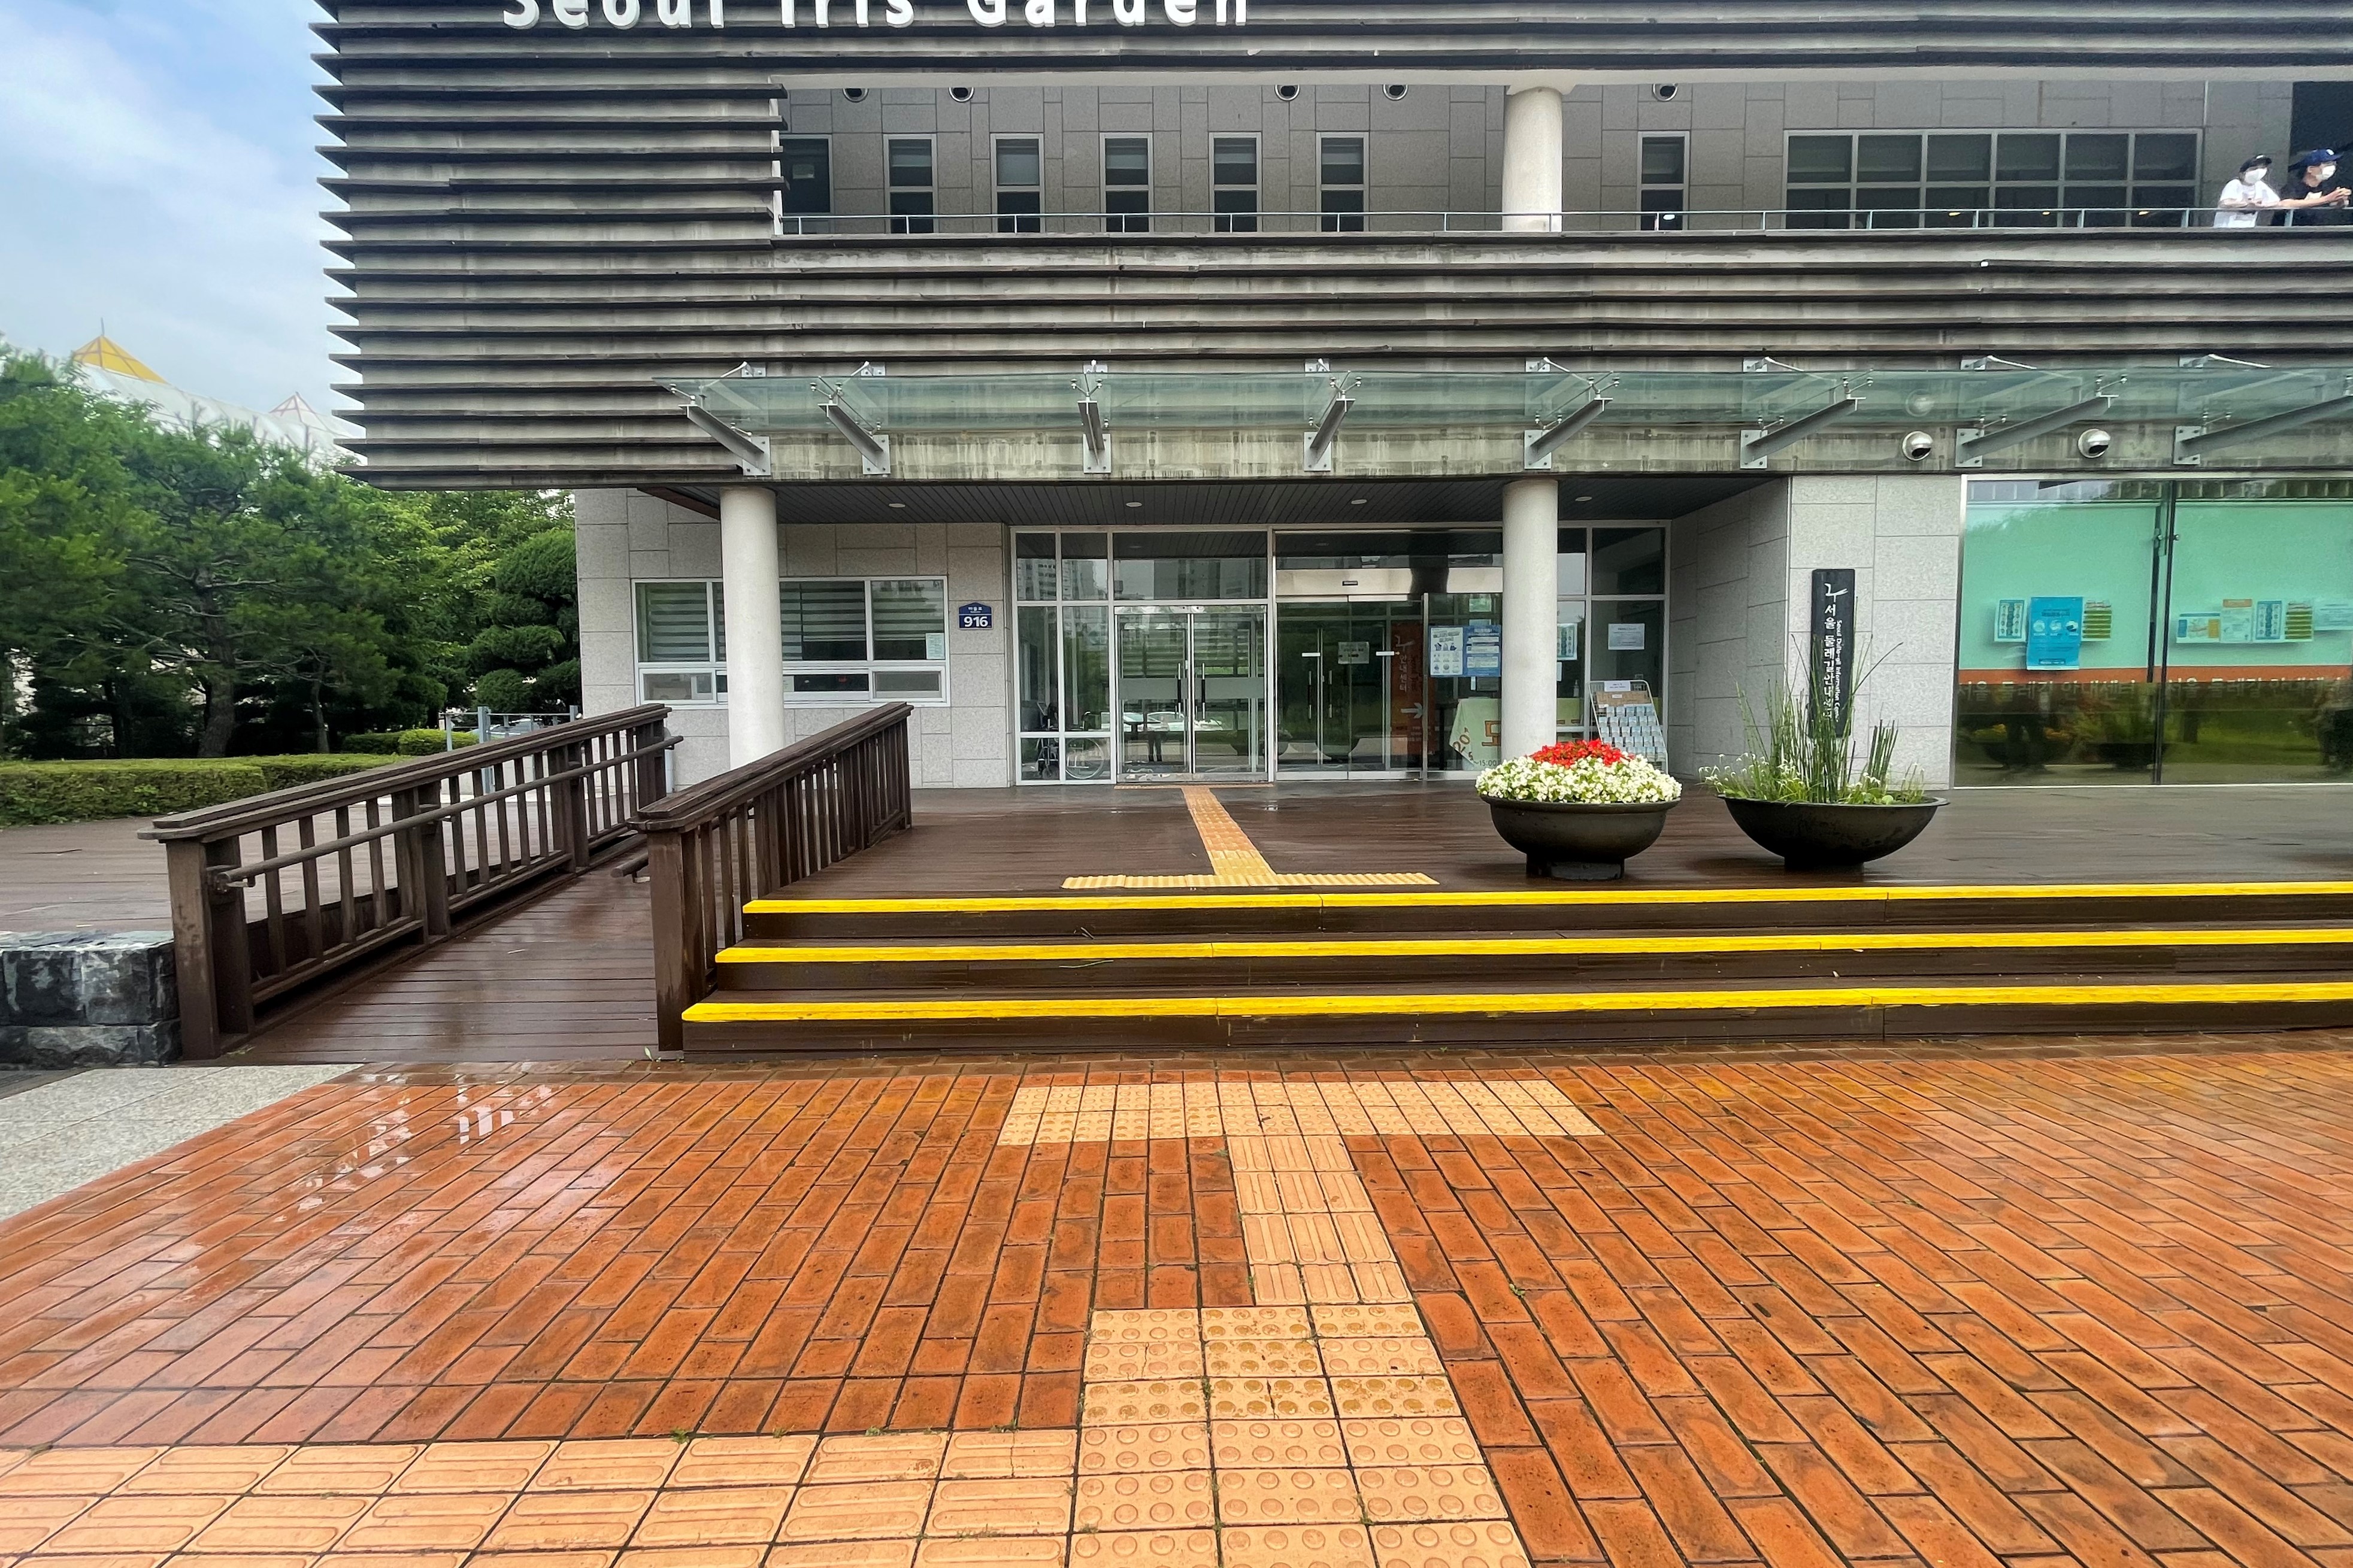 Entryway and Main entrance0 : Entryway to Seoul Iris Garden that provides tactile paving for the visually impaired